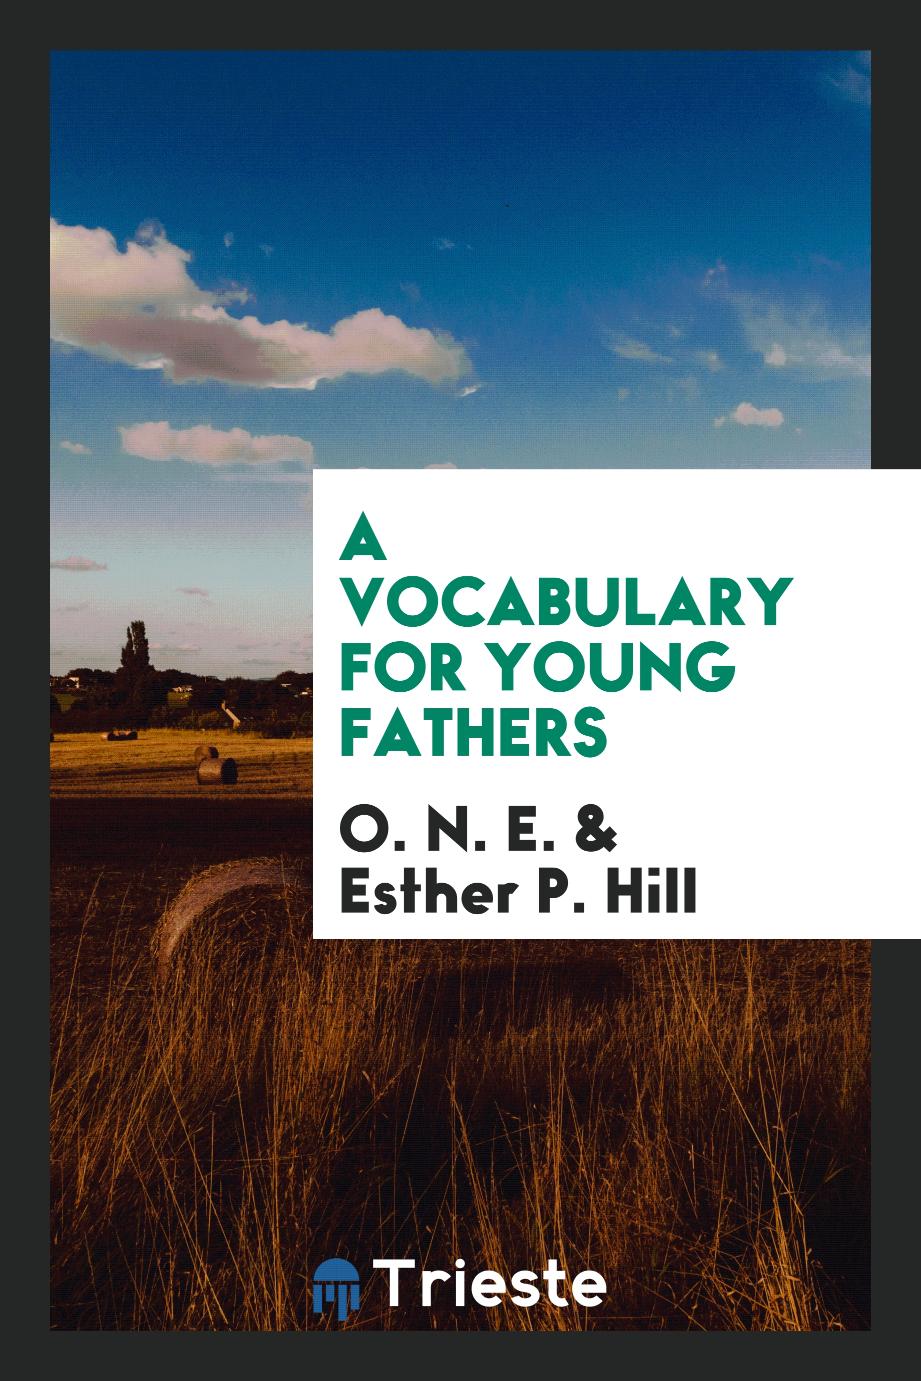 A Vocabulary for Young Fathers